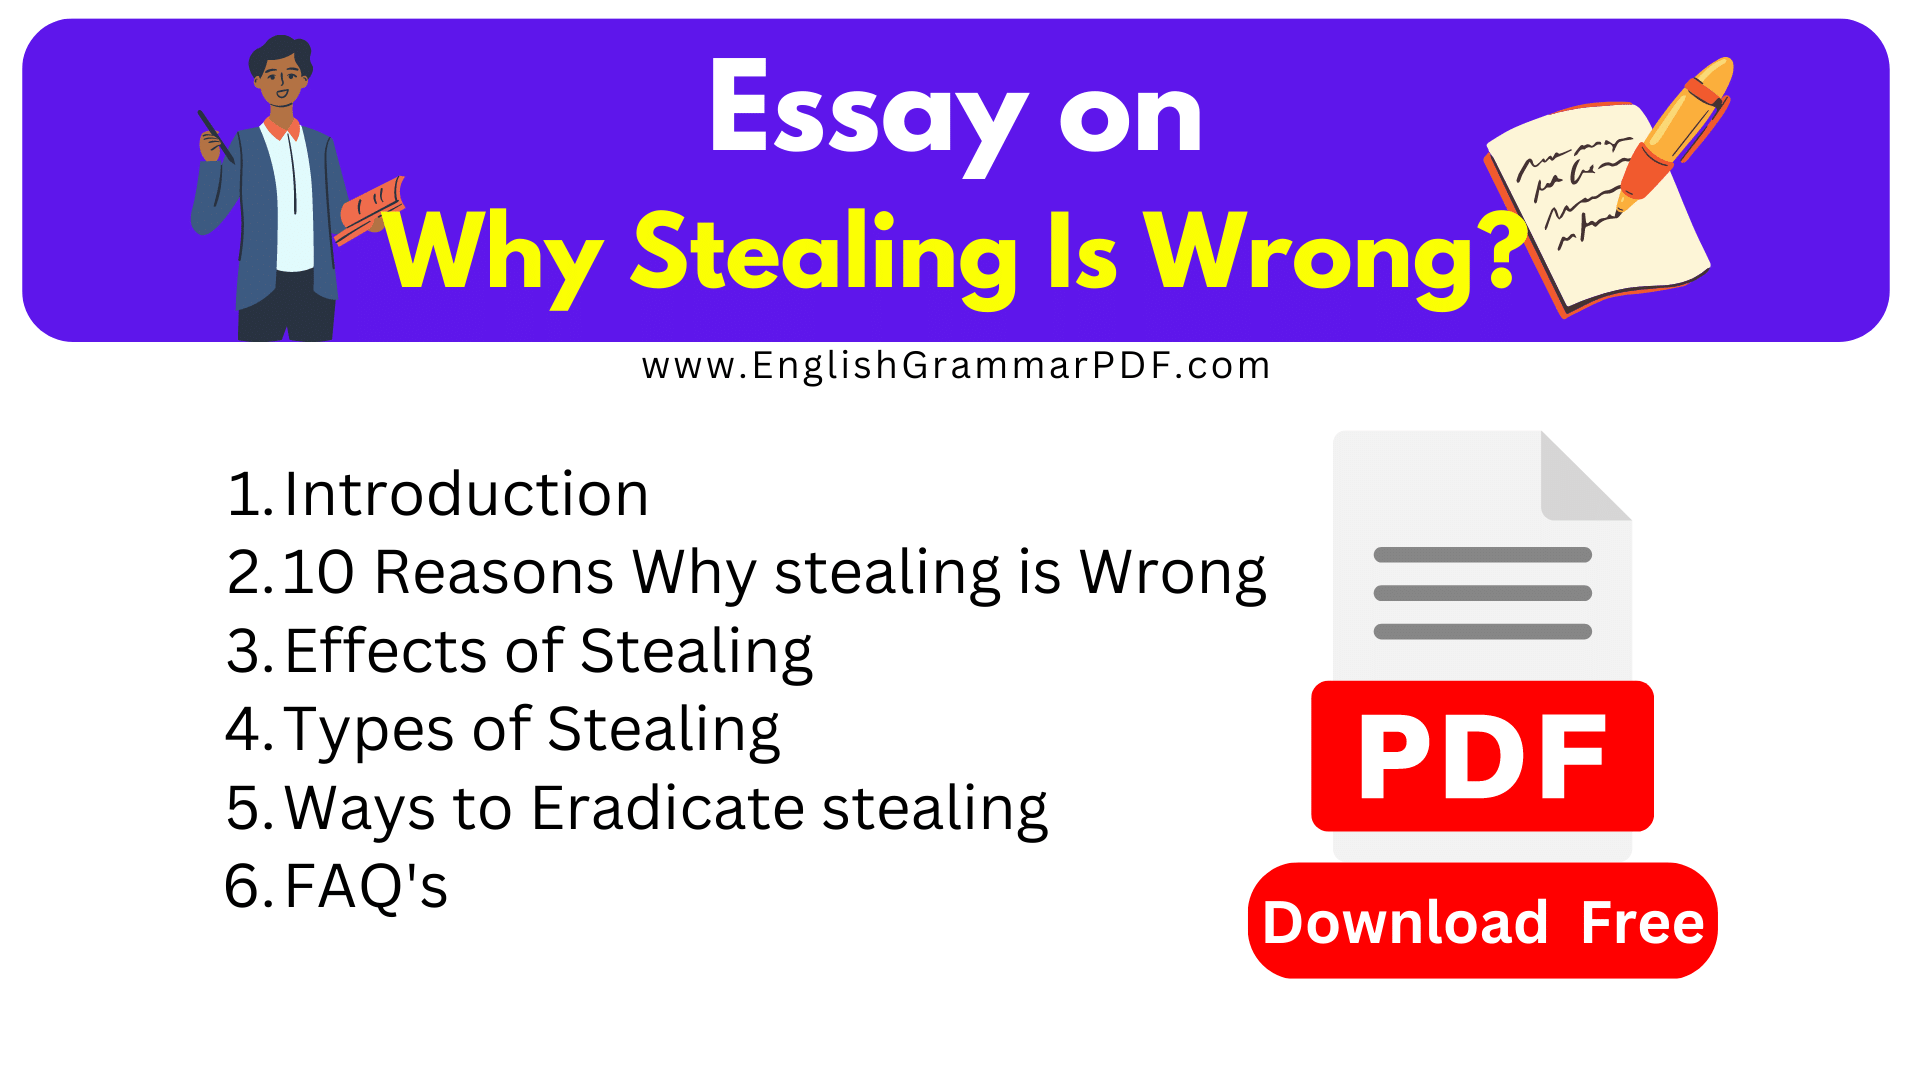 Essay on Why Stealing Is Wrong